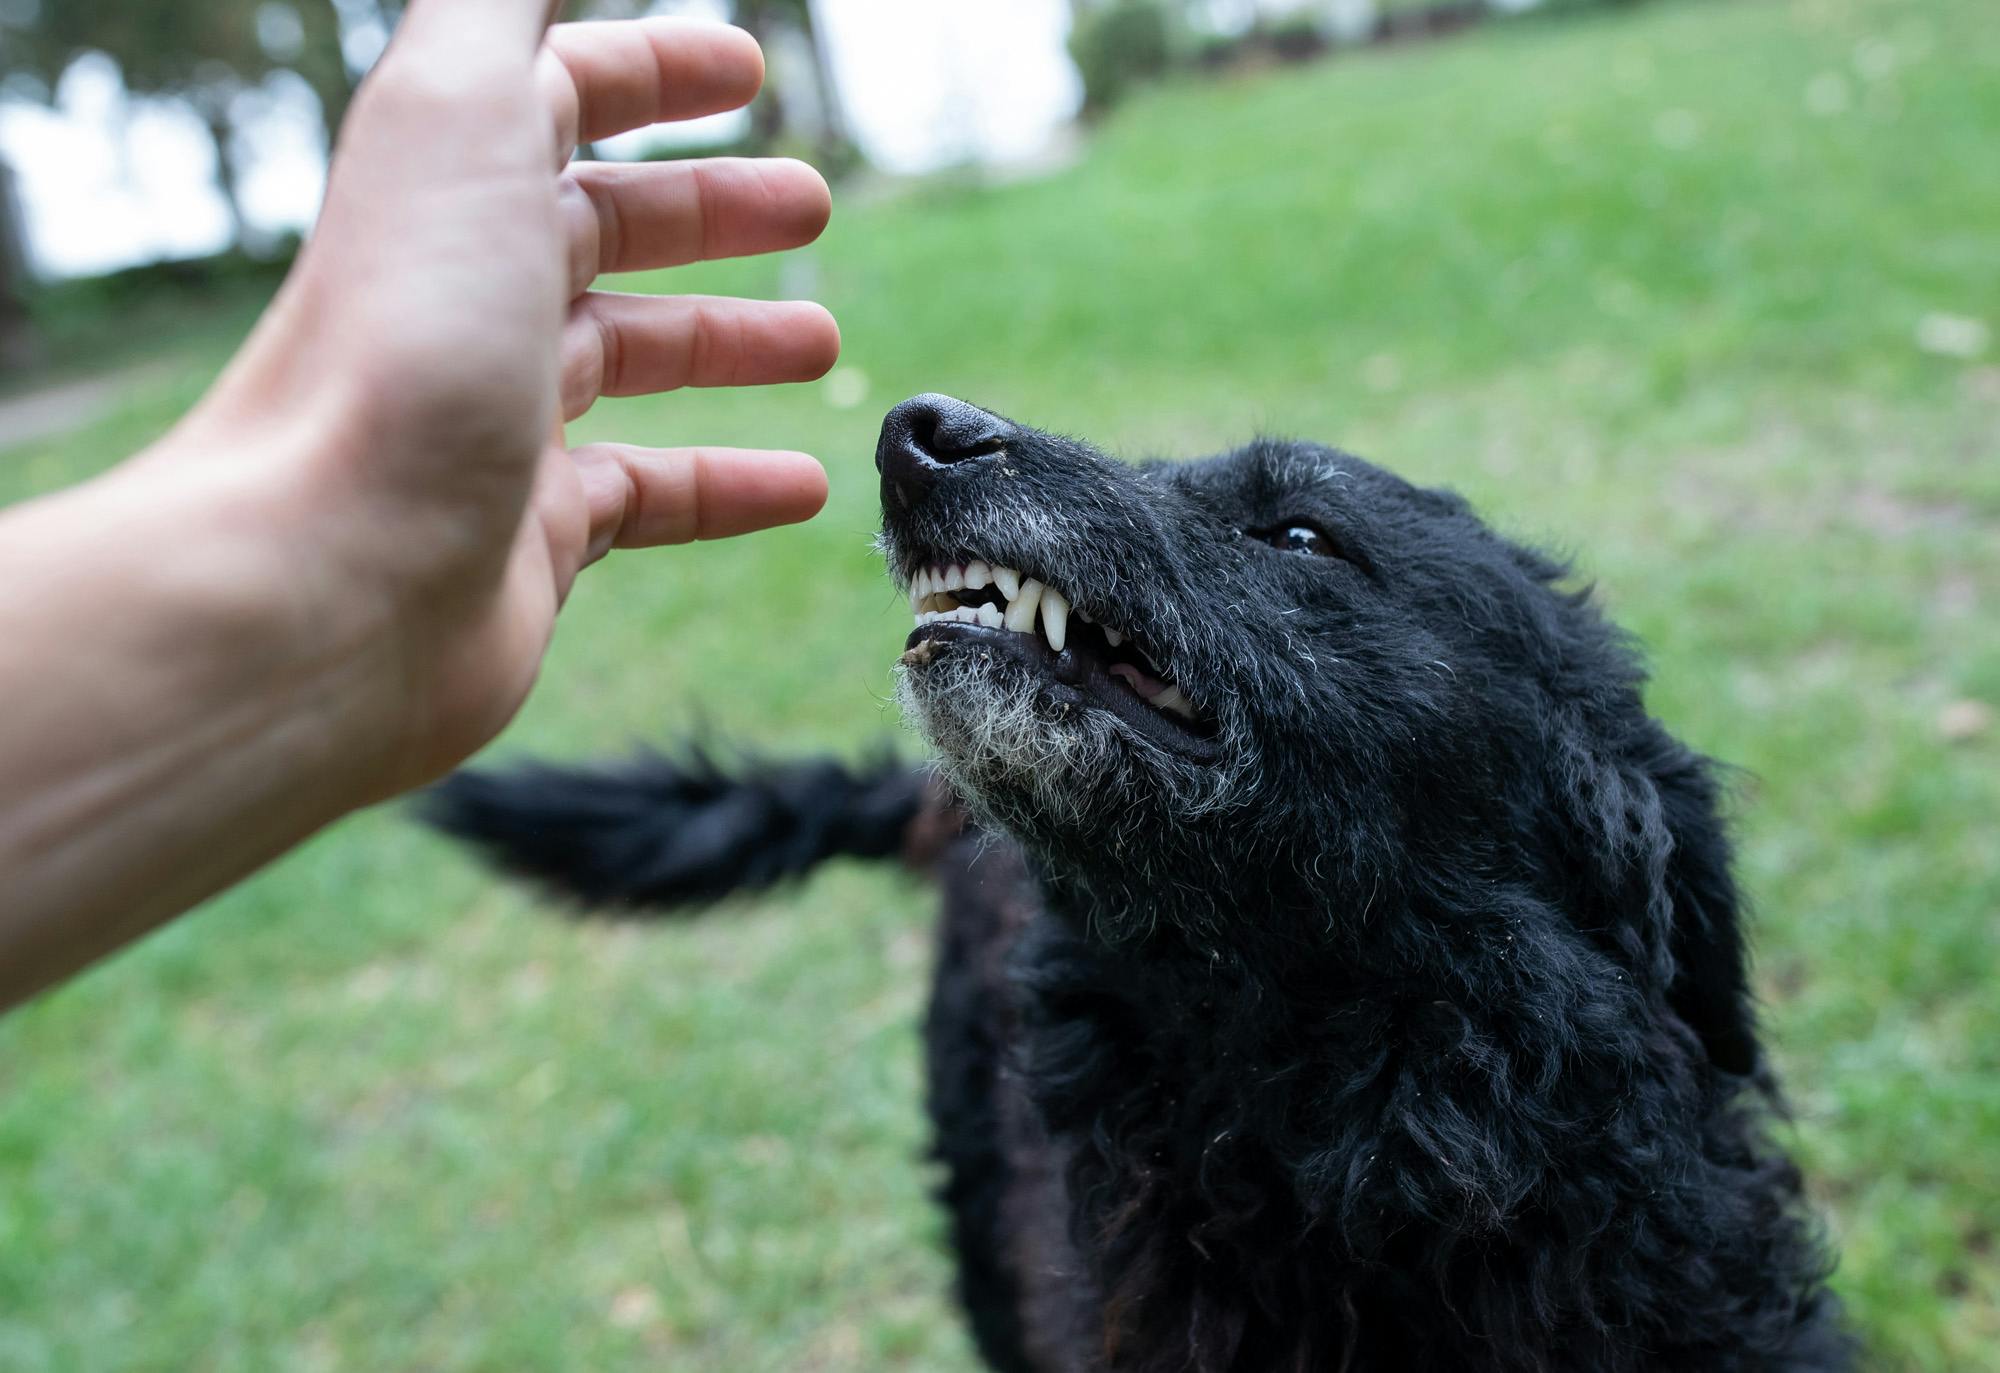 black dog with gray muzzle showing teeth when hand moves toward it